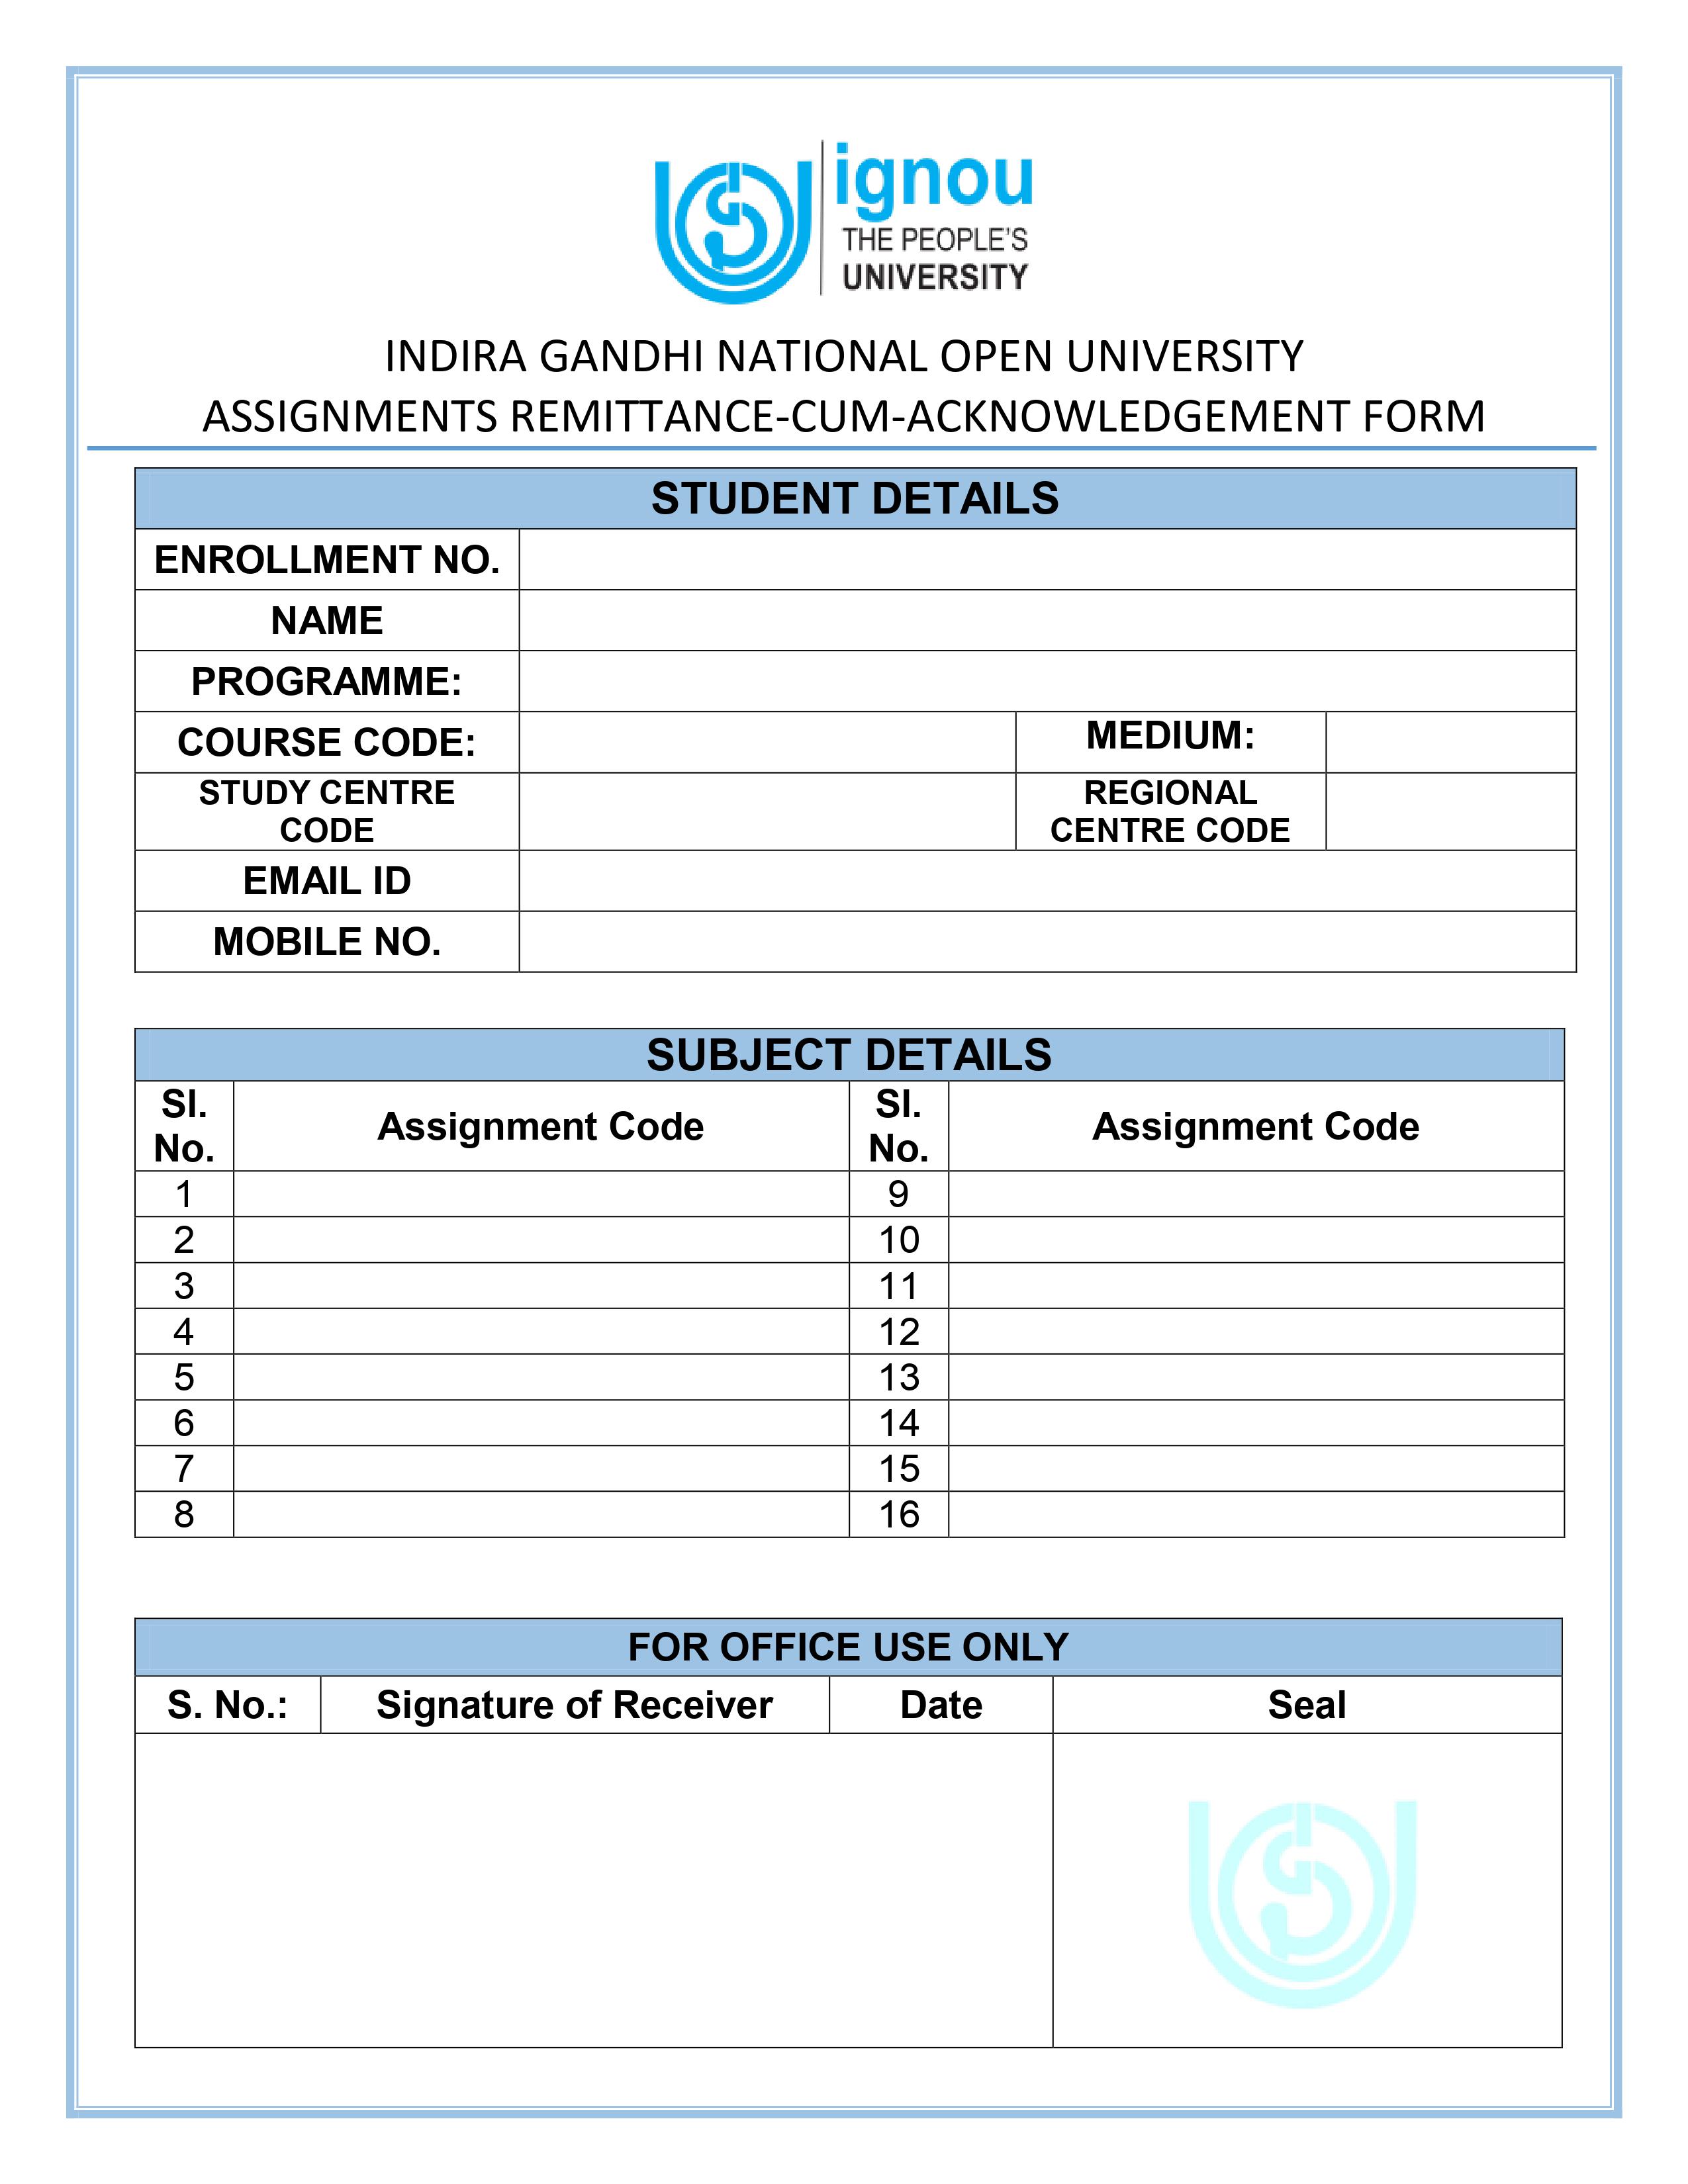 IGNOU AKNOWLEDGMENT SLIP | IGNOU AKNOWLEDGMENT RECEIP PDF DOWNLOAD one page